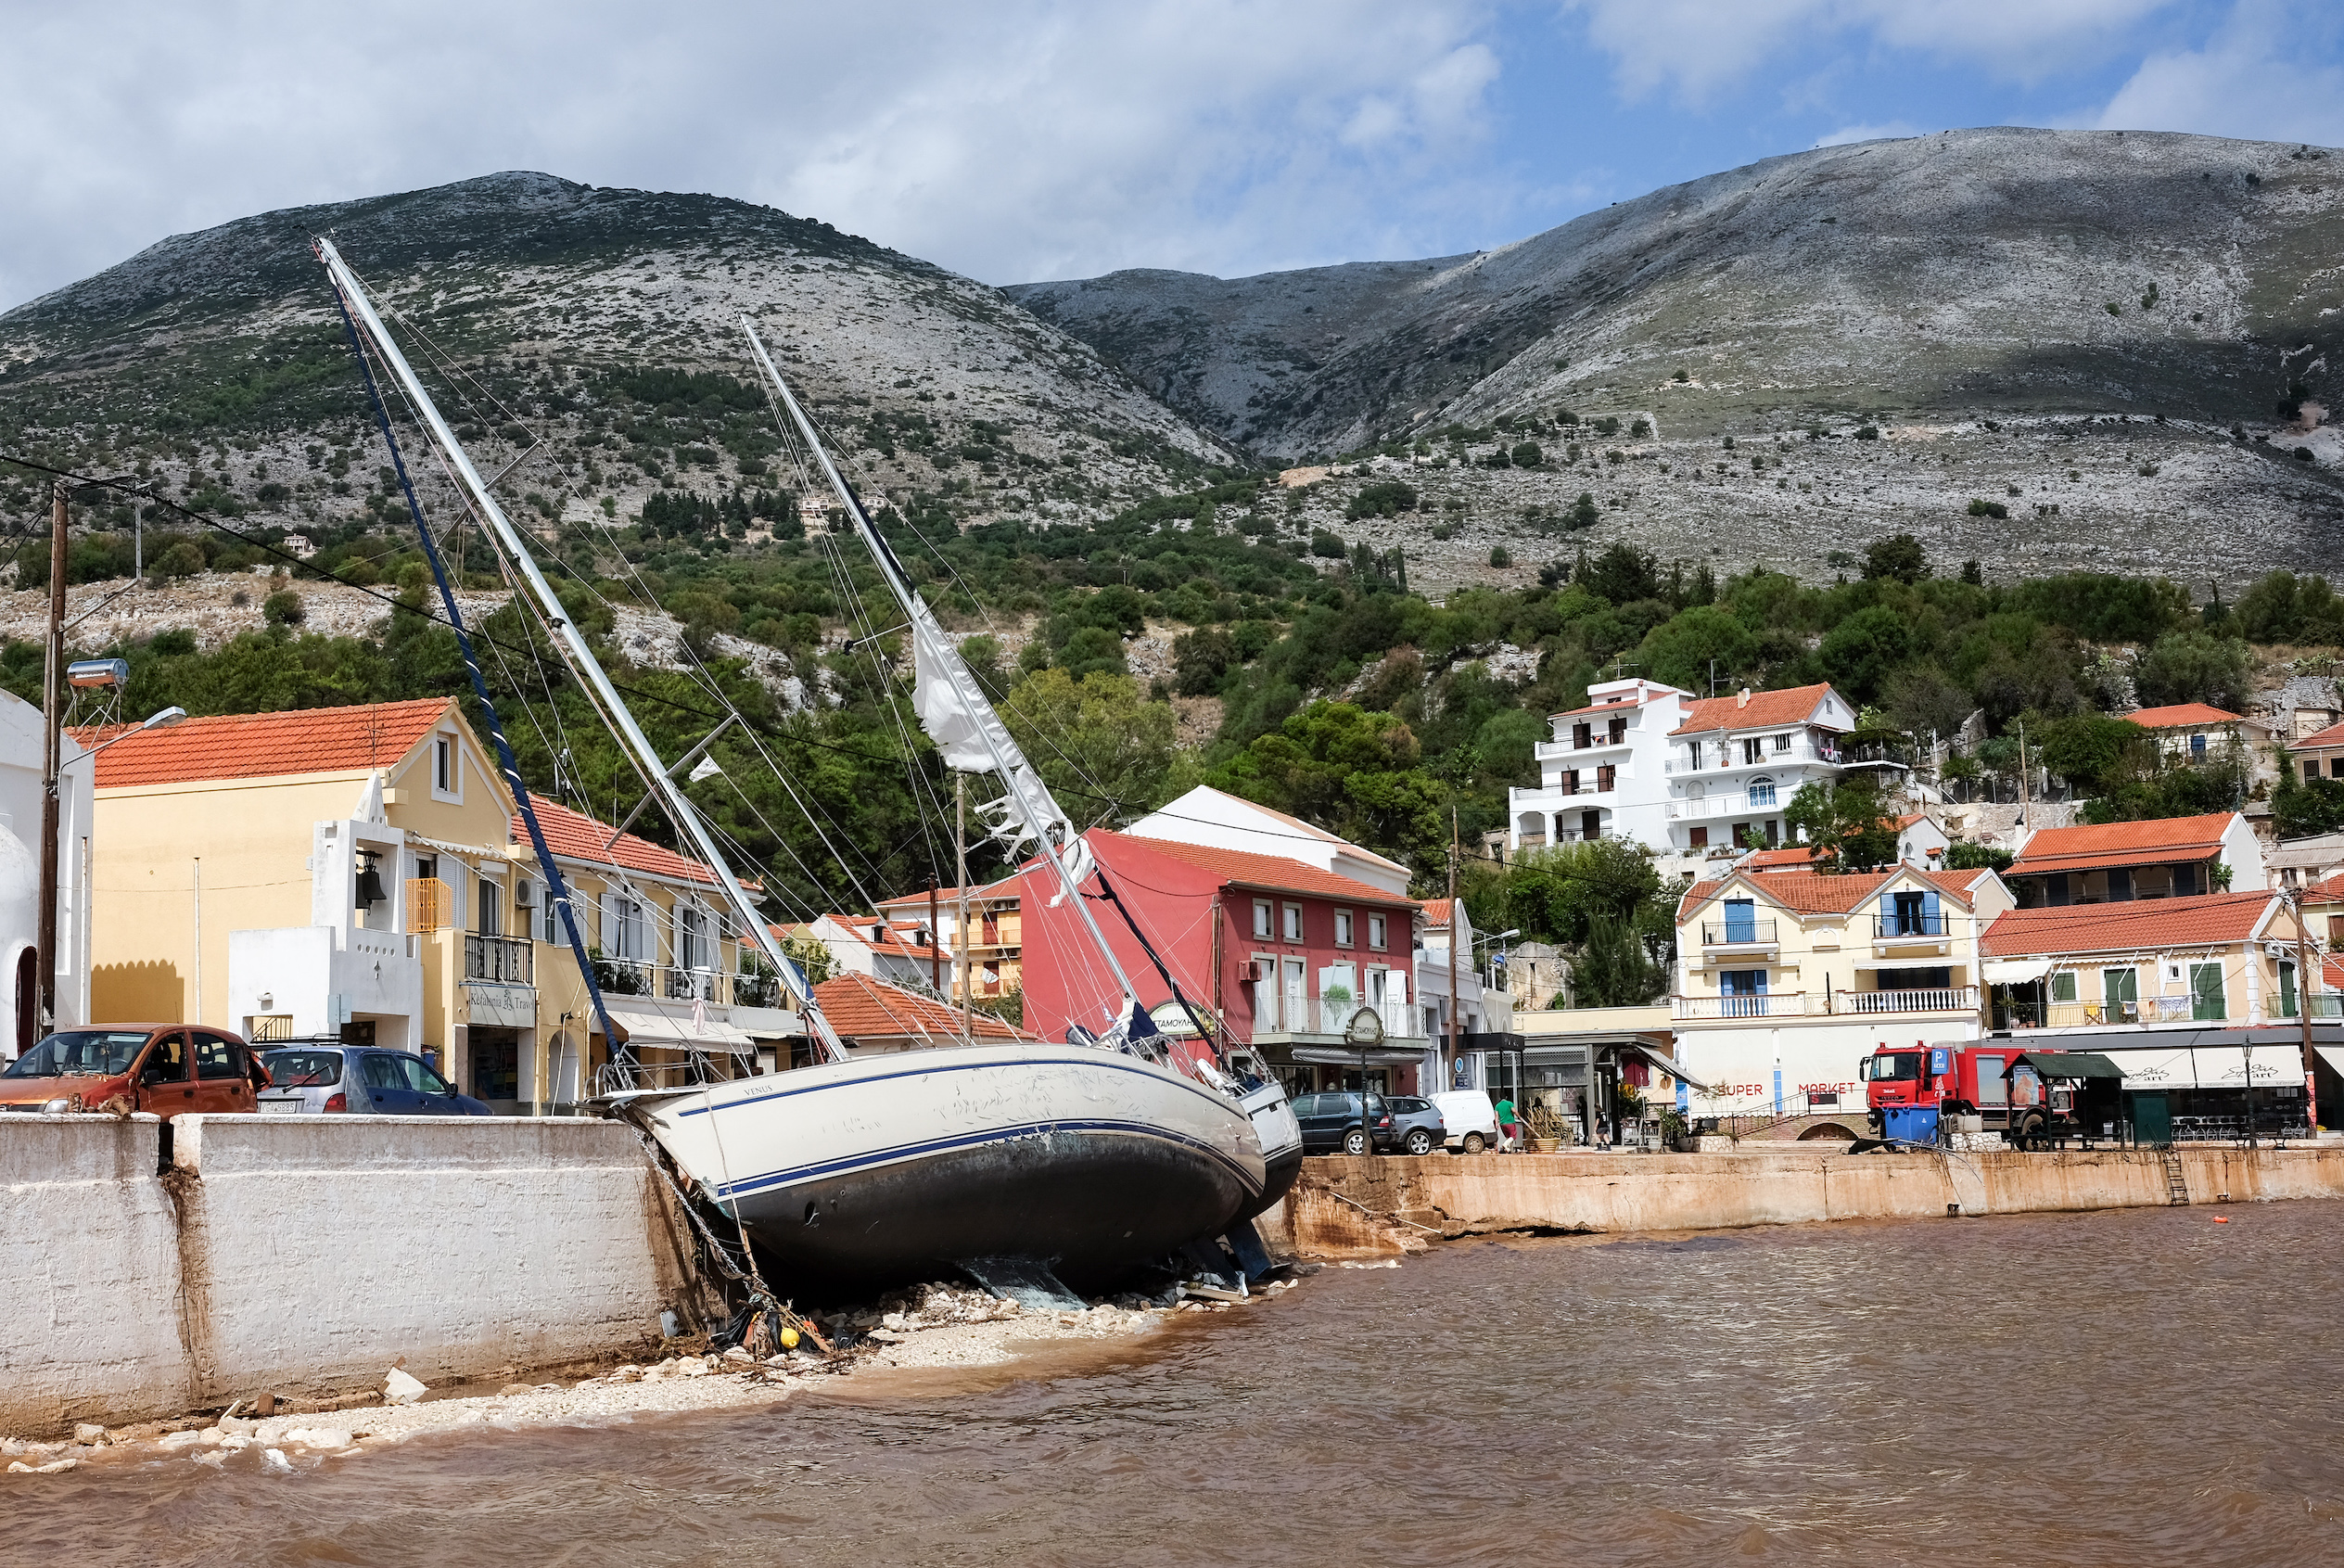 Sailing yachts are stranded in the harbour after the heavy autumn storm "Ianos" at the quay wall. The so-called Medicane, a Mediterranean hurricane, and another storm over the North Aegean Sea caused severe damage and destruction